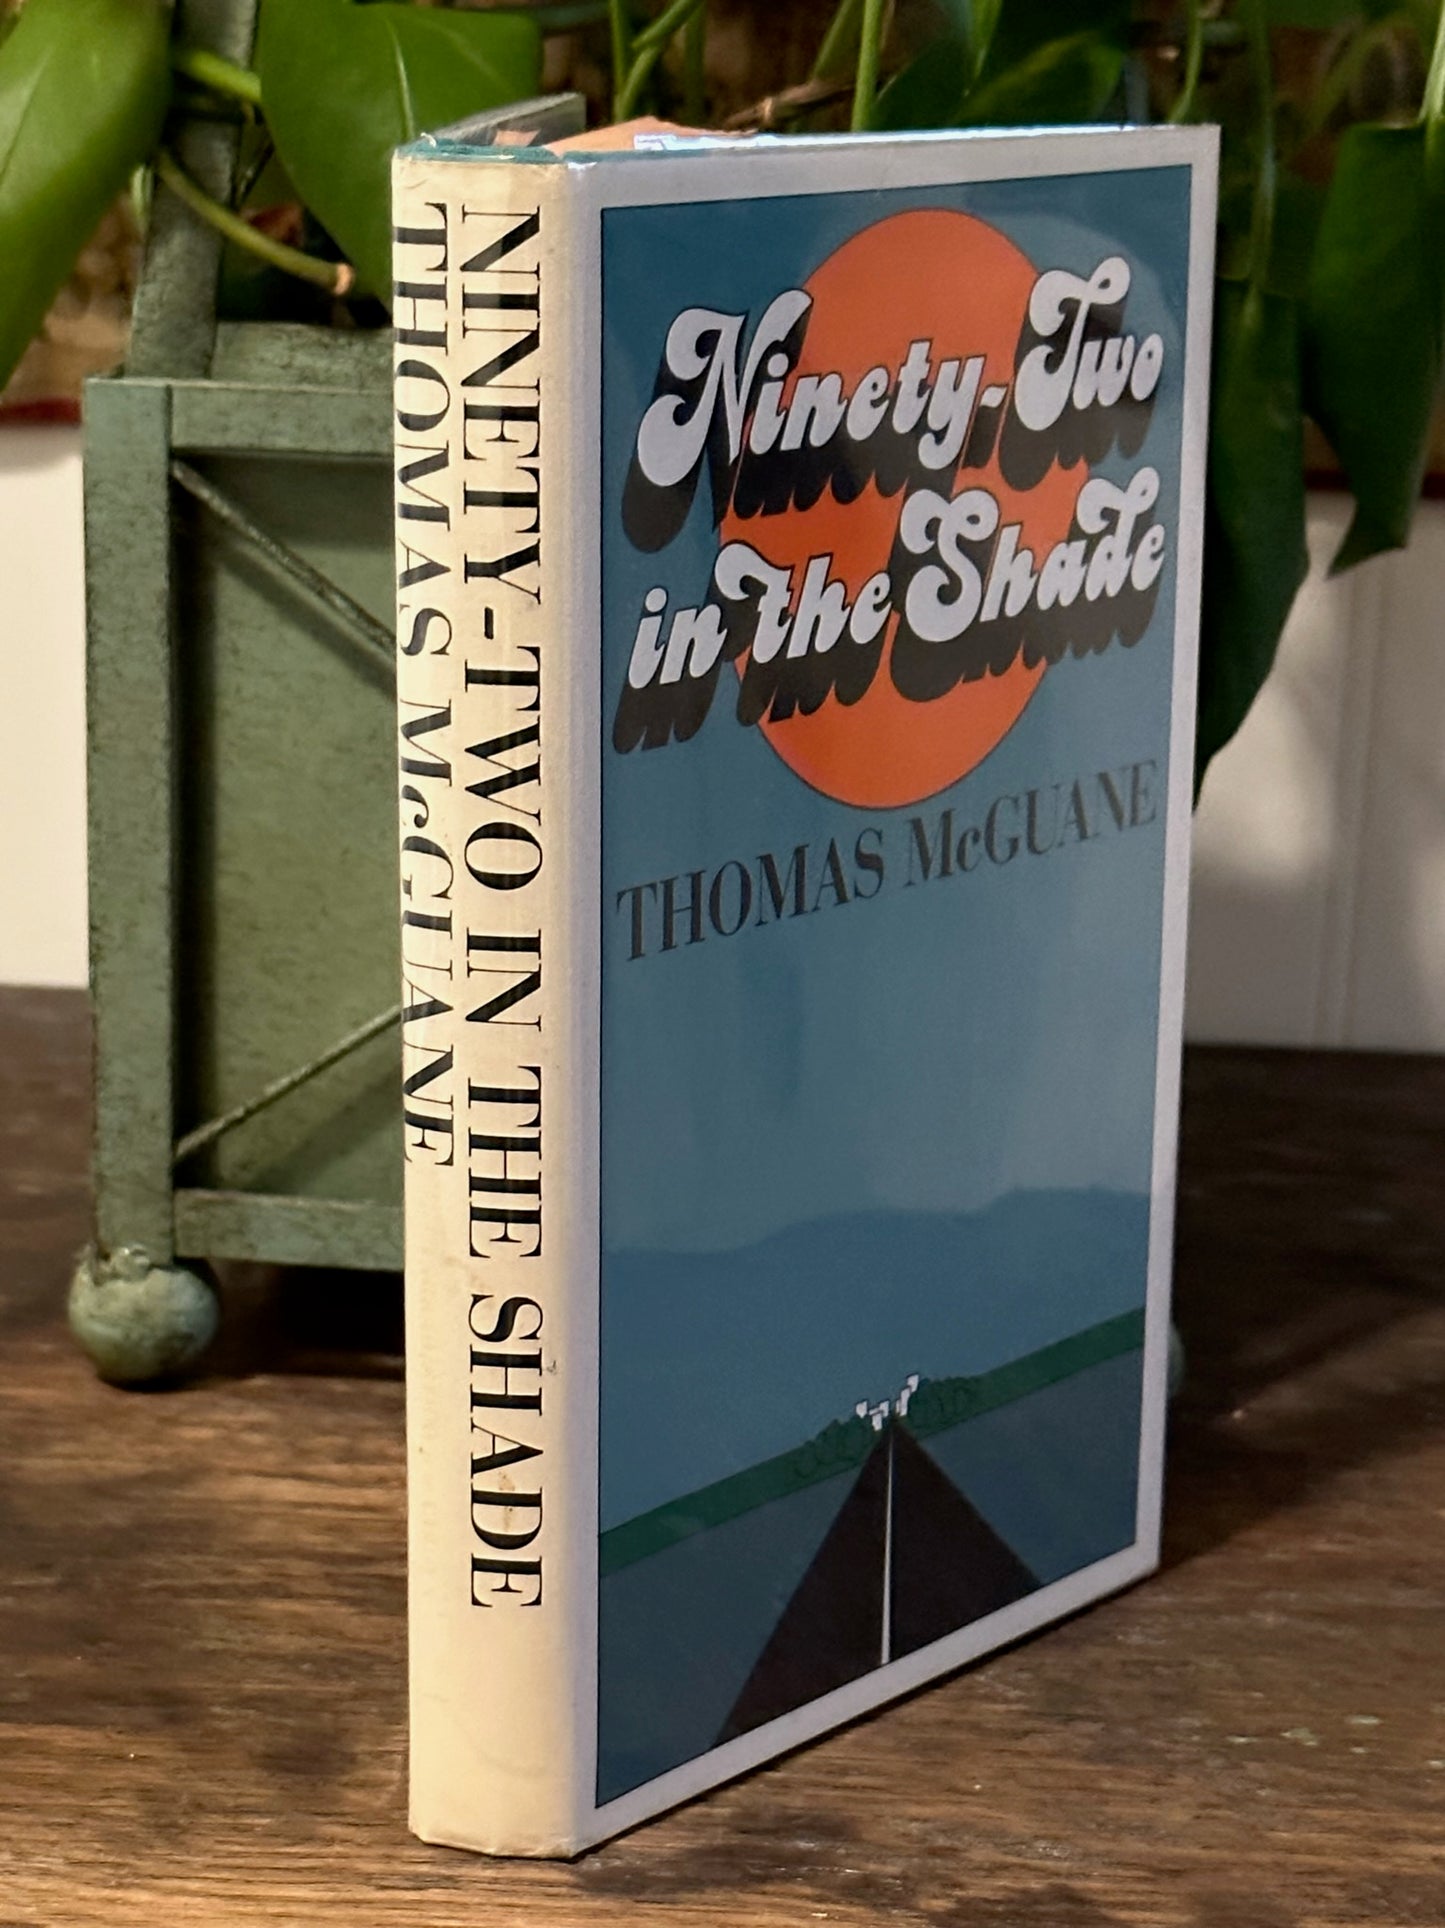 Ninety-Two in The Shade by Thomas McGuane (First Edition